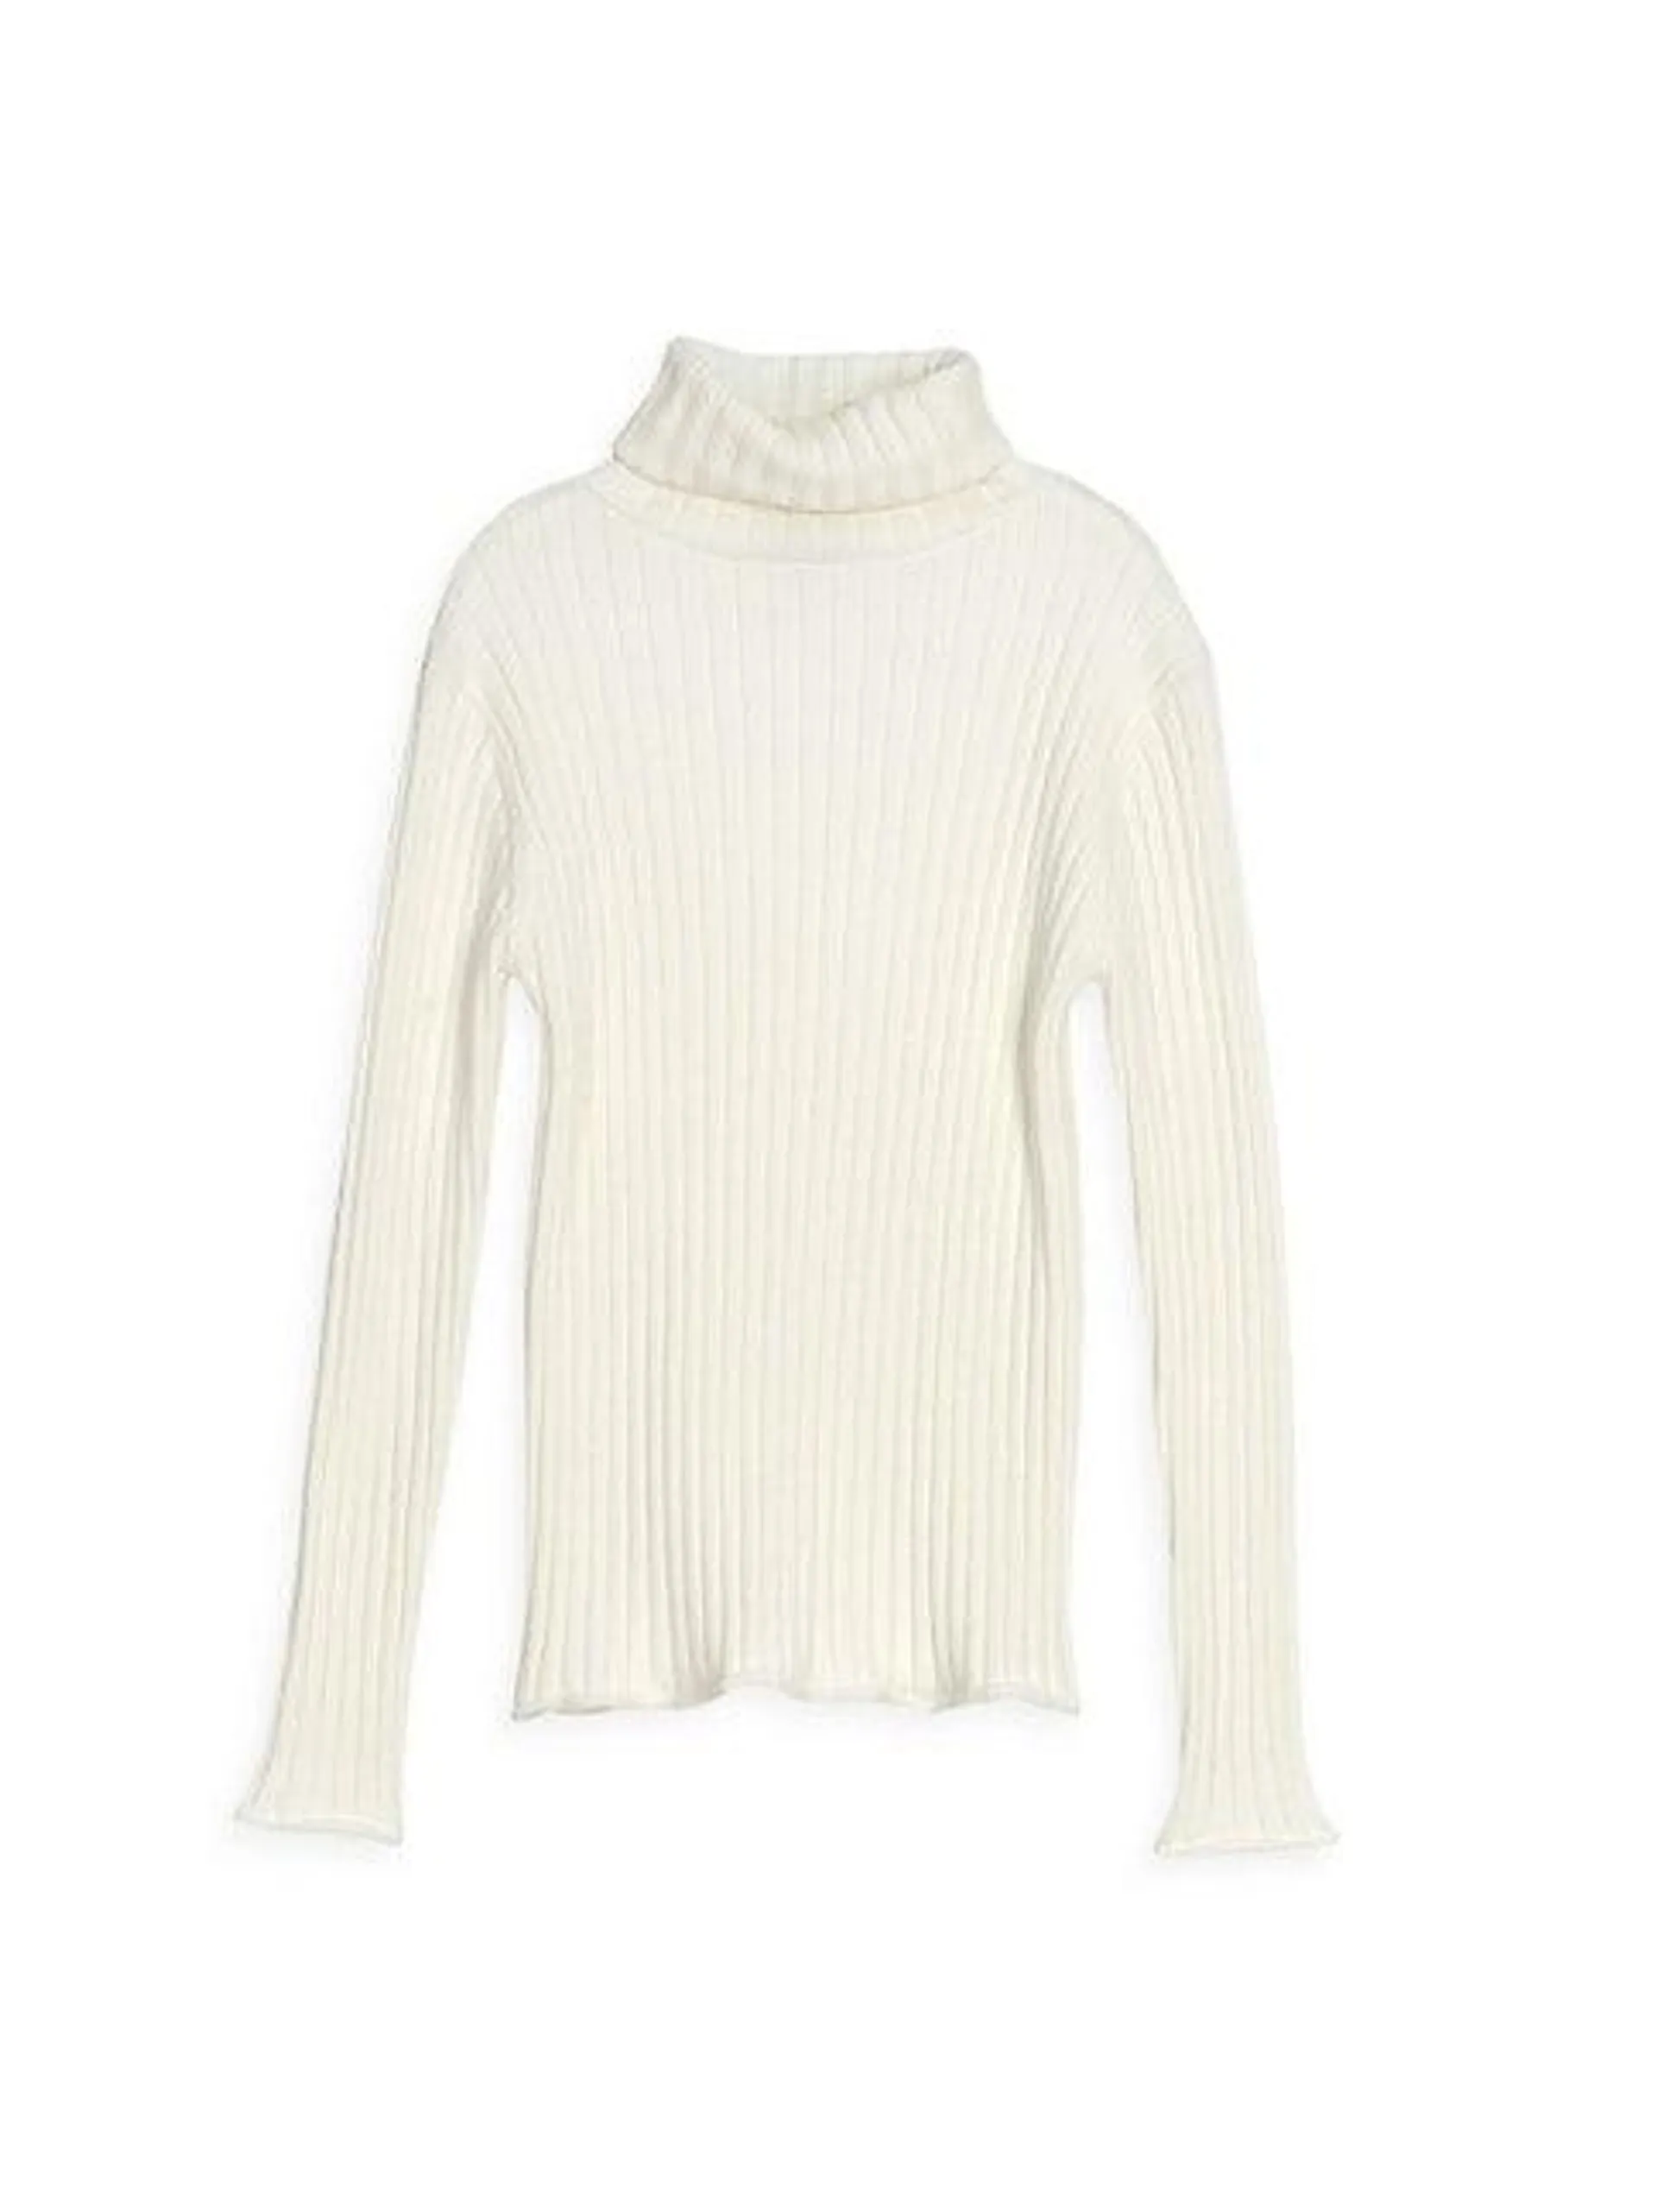 Girl's Knit Rolled-Neck Sweater